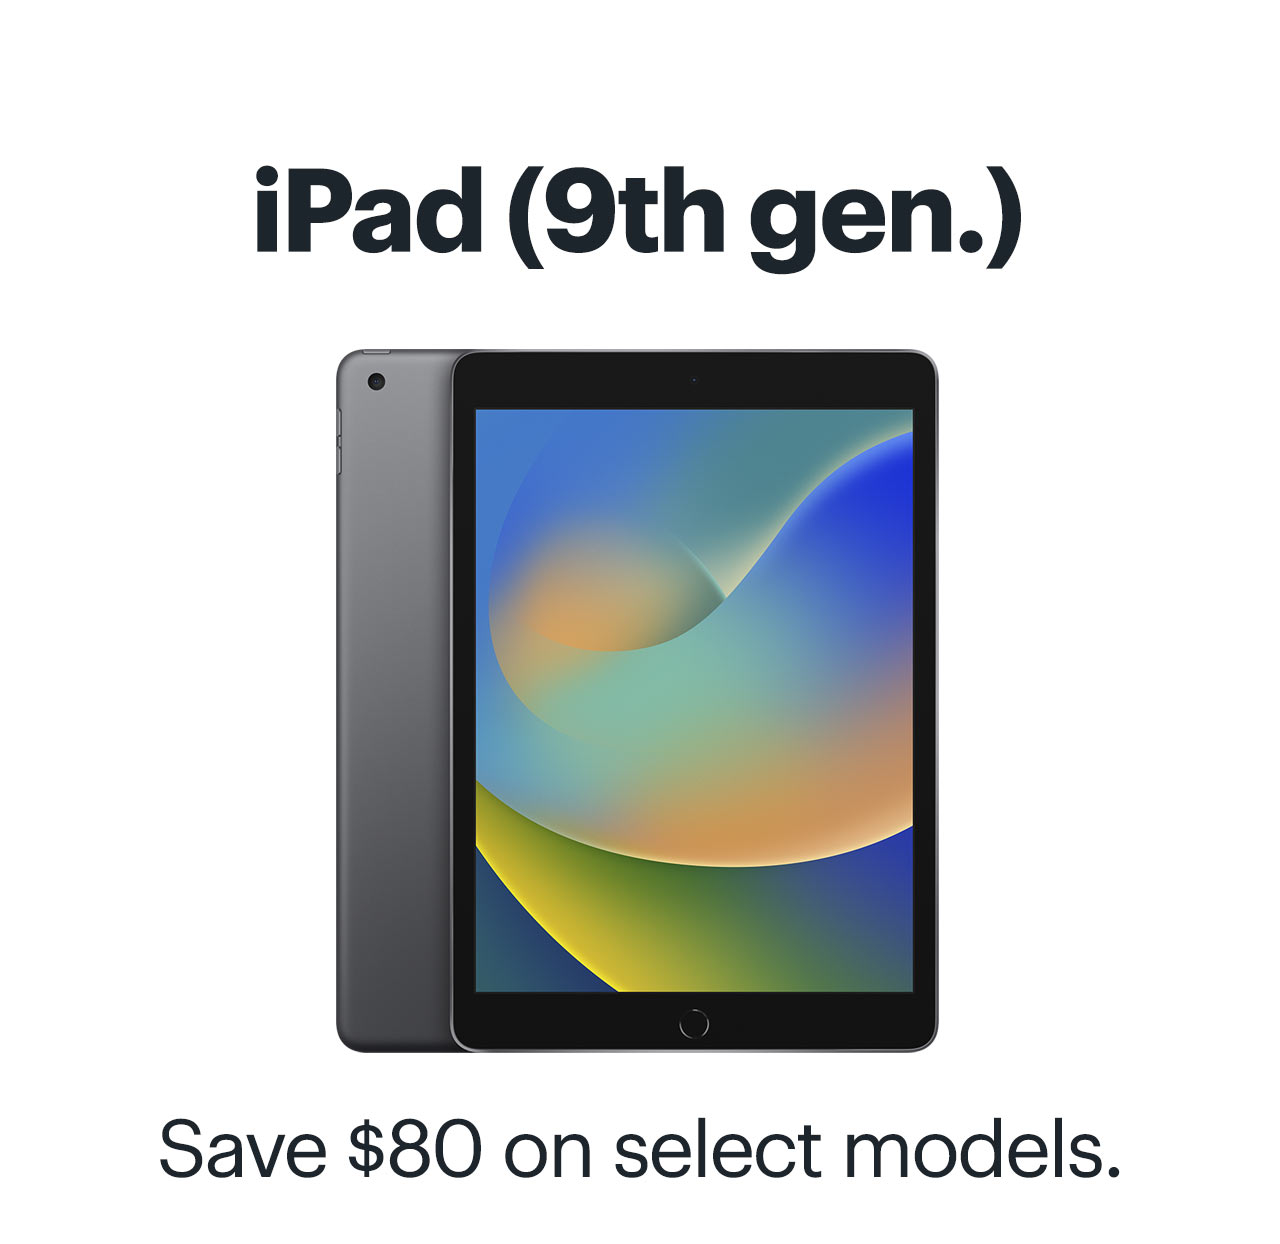 iPad 9th generation. Save $80 on select models. Shop now.